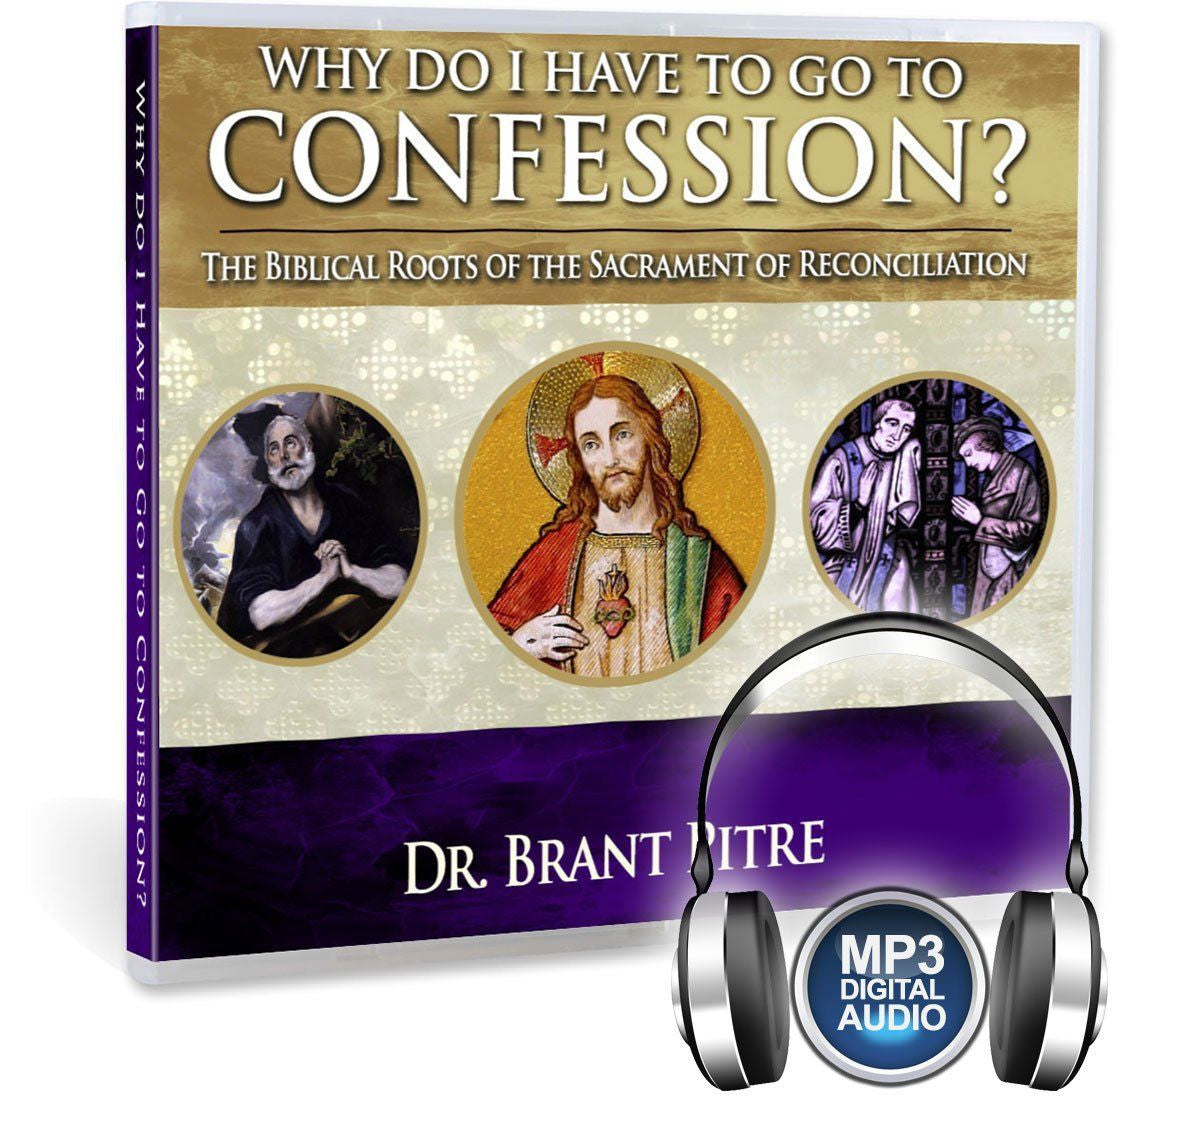 In this Bible study with Dr. Brant Pitre, you'll understand why the Catholic Church teaches that we need to go to the sacrament of confession: Ultimately, because Jesus said so (CD).